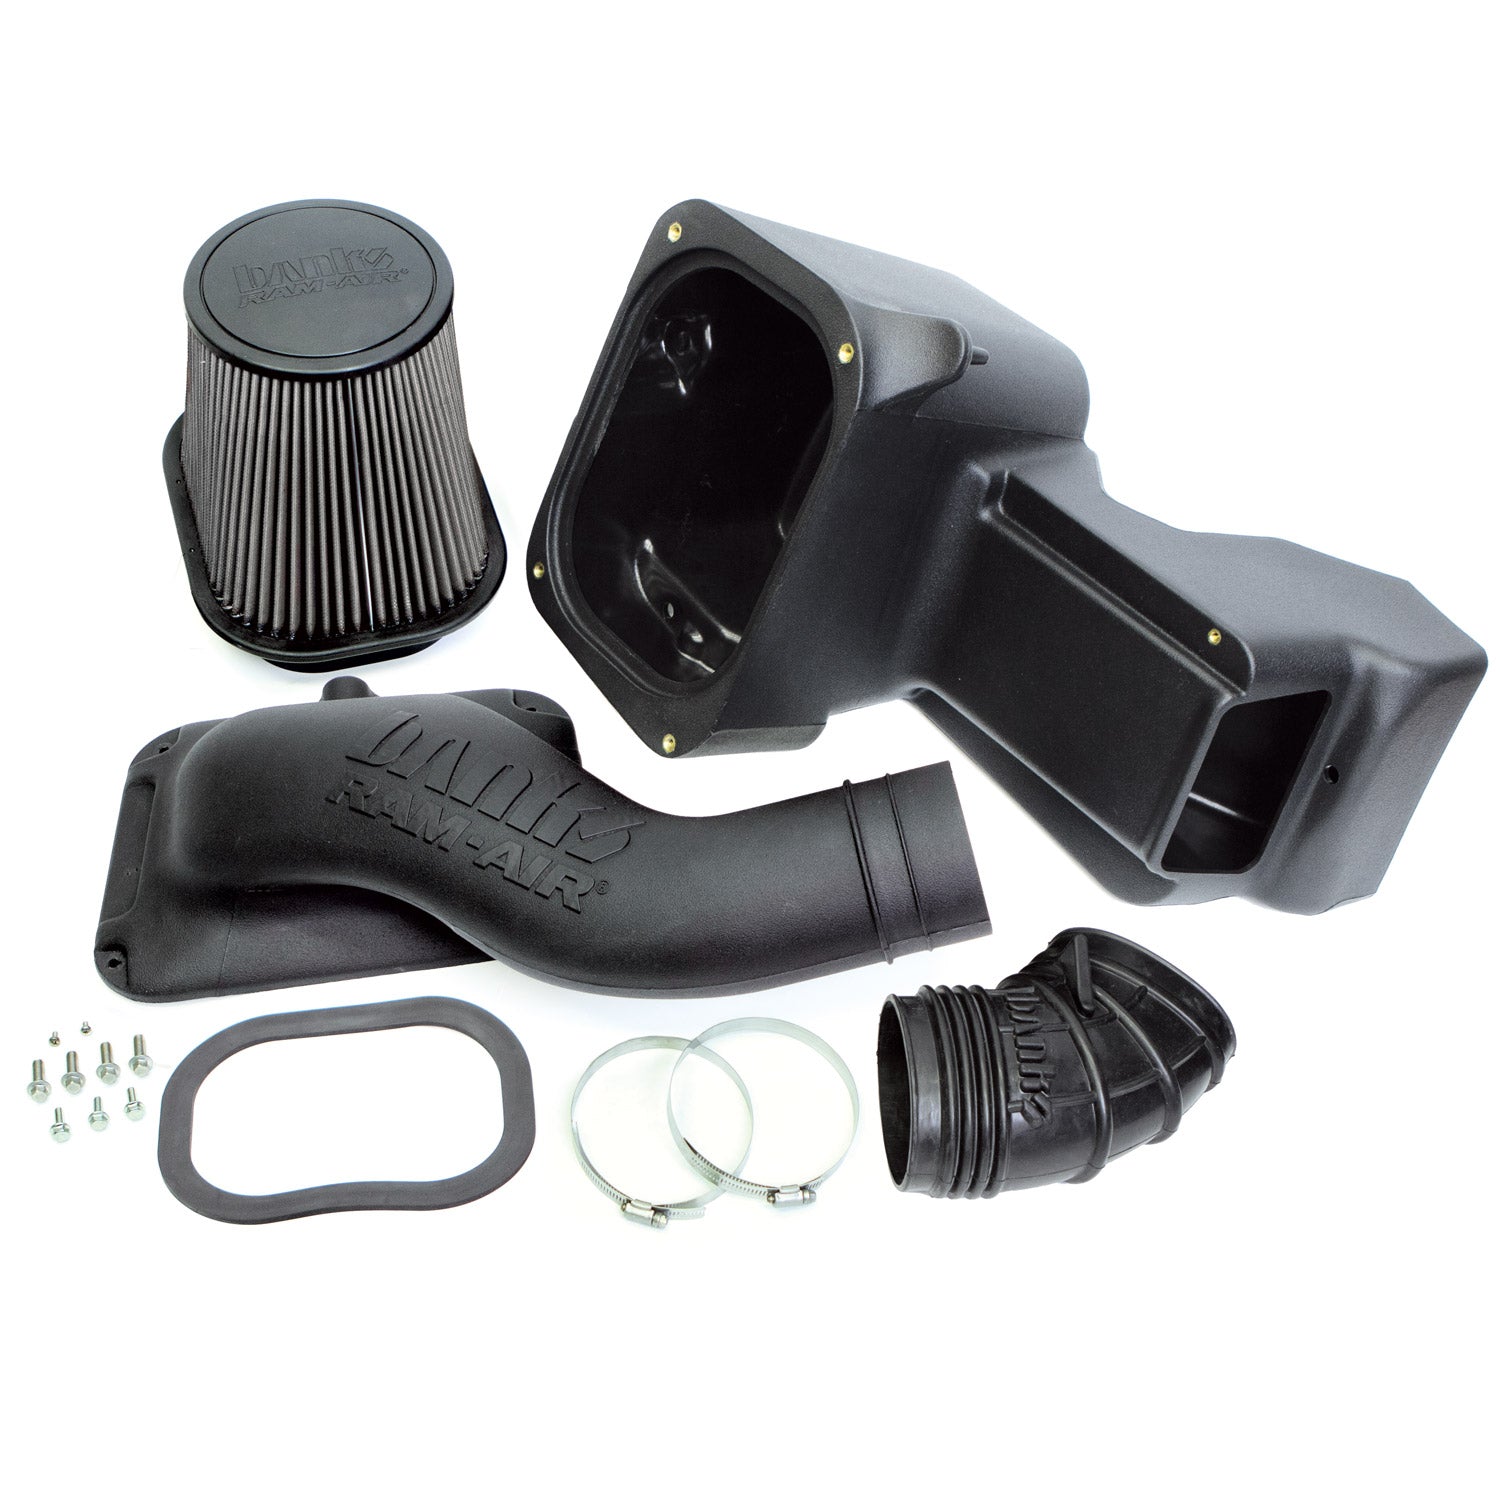 Components found in the Banks Ram-Air intake for 2017-2019 Ford Super Duty 6.7L